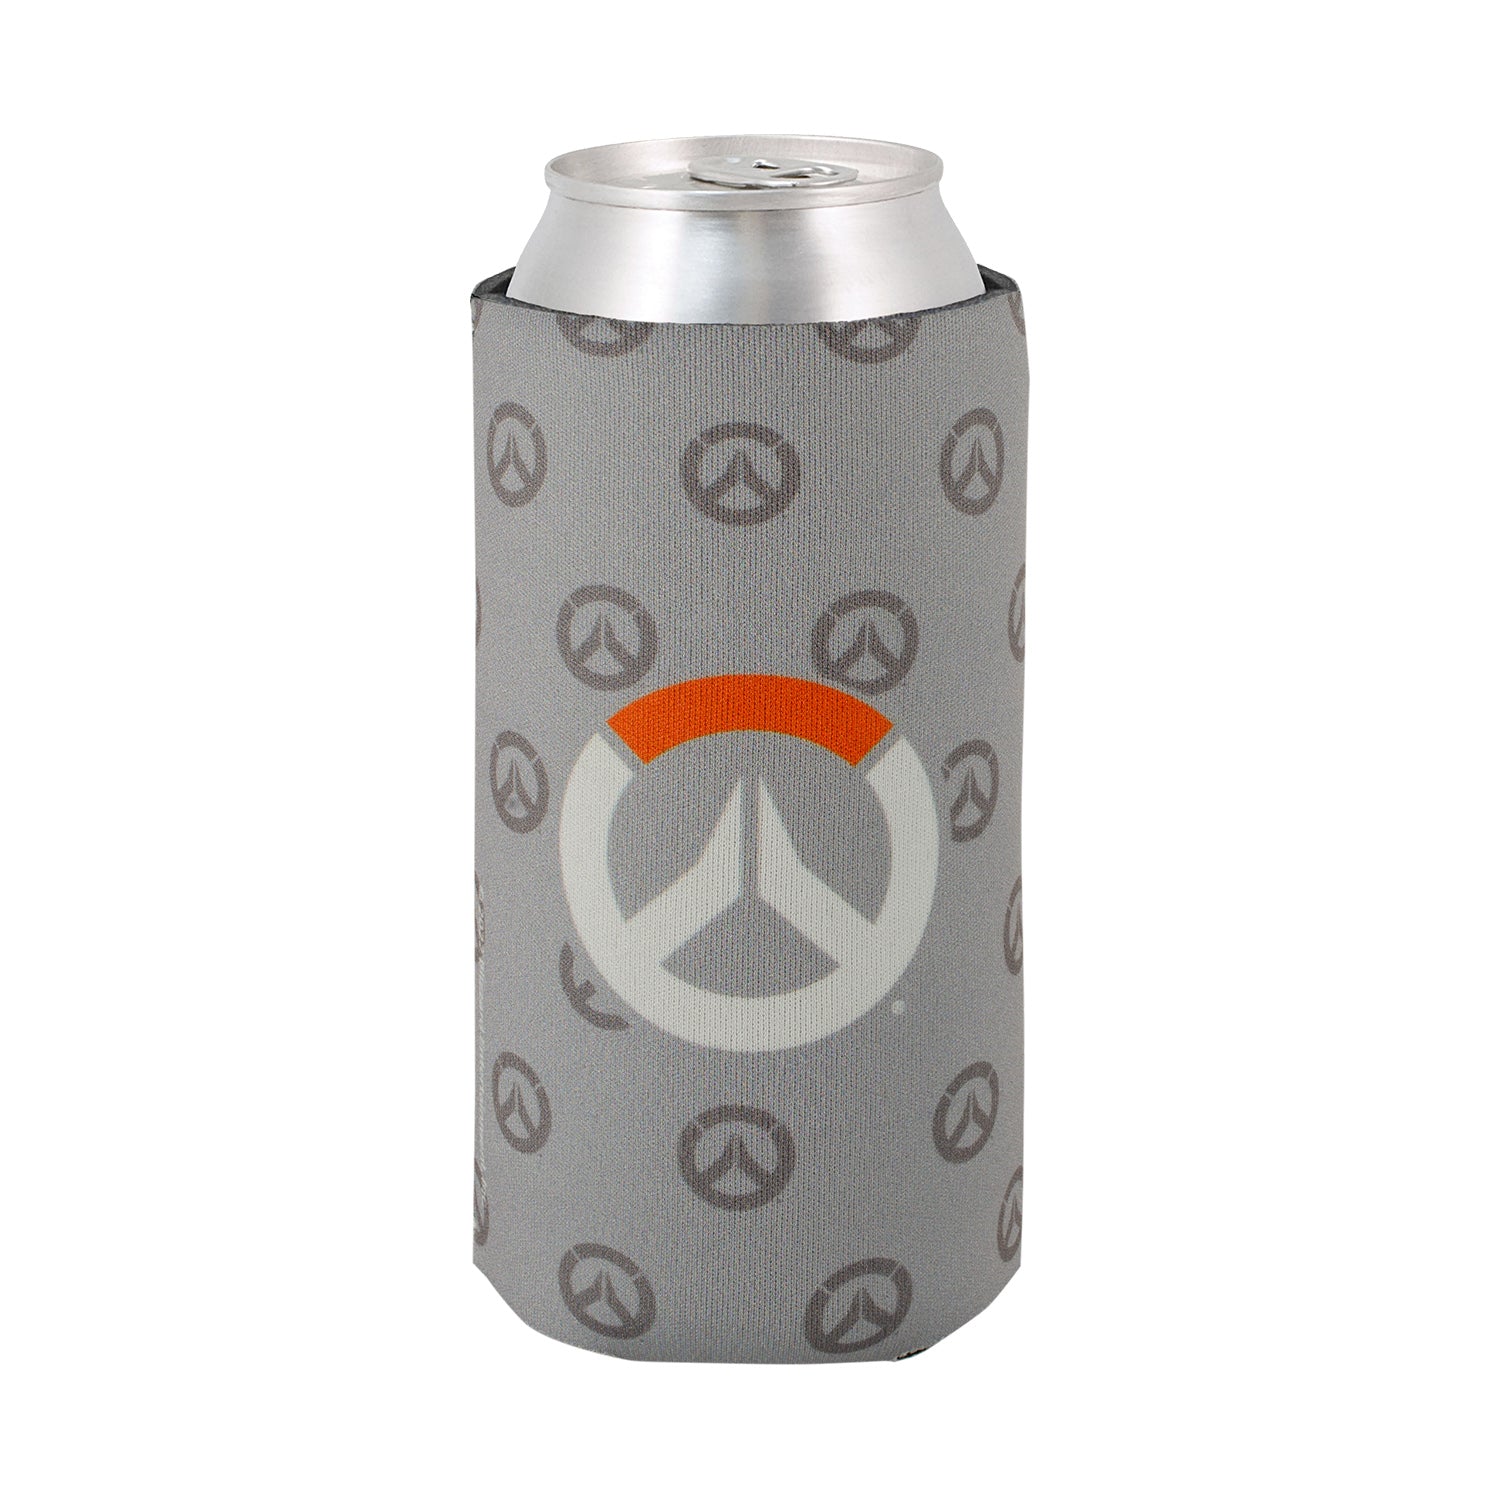 Overwatch 2 16oz Can Cooler - Front View